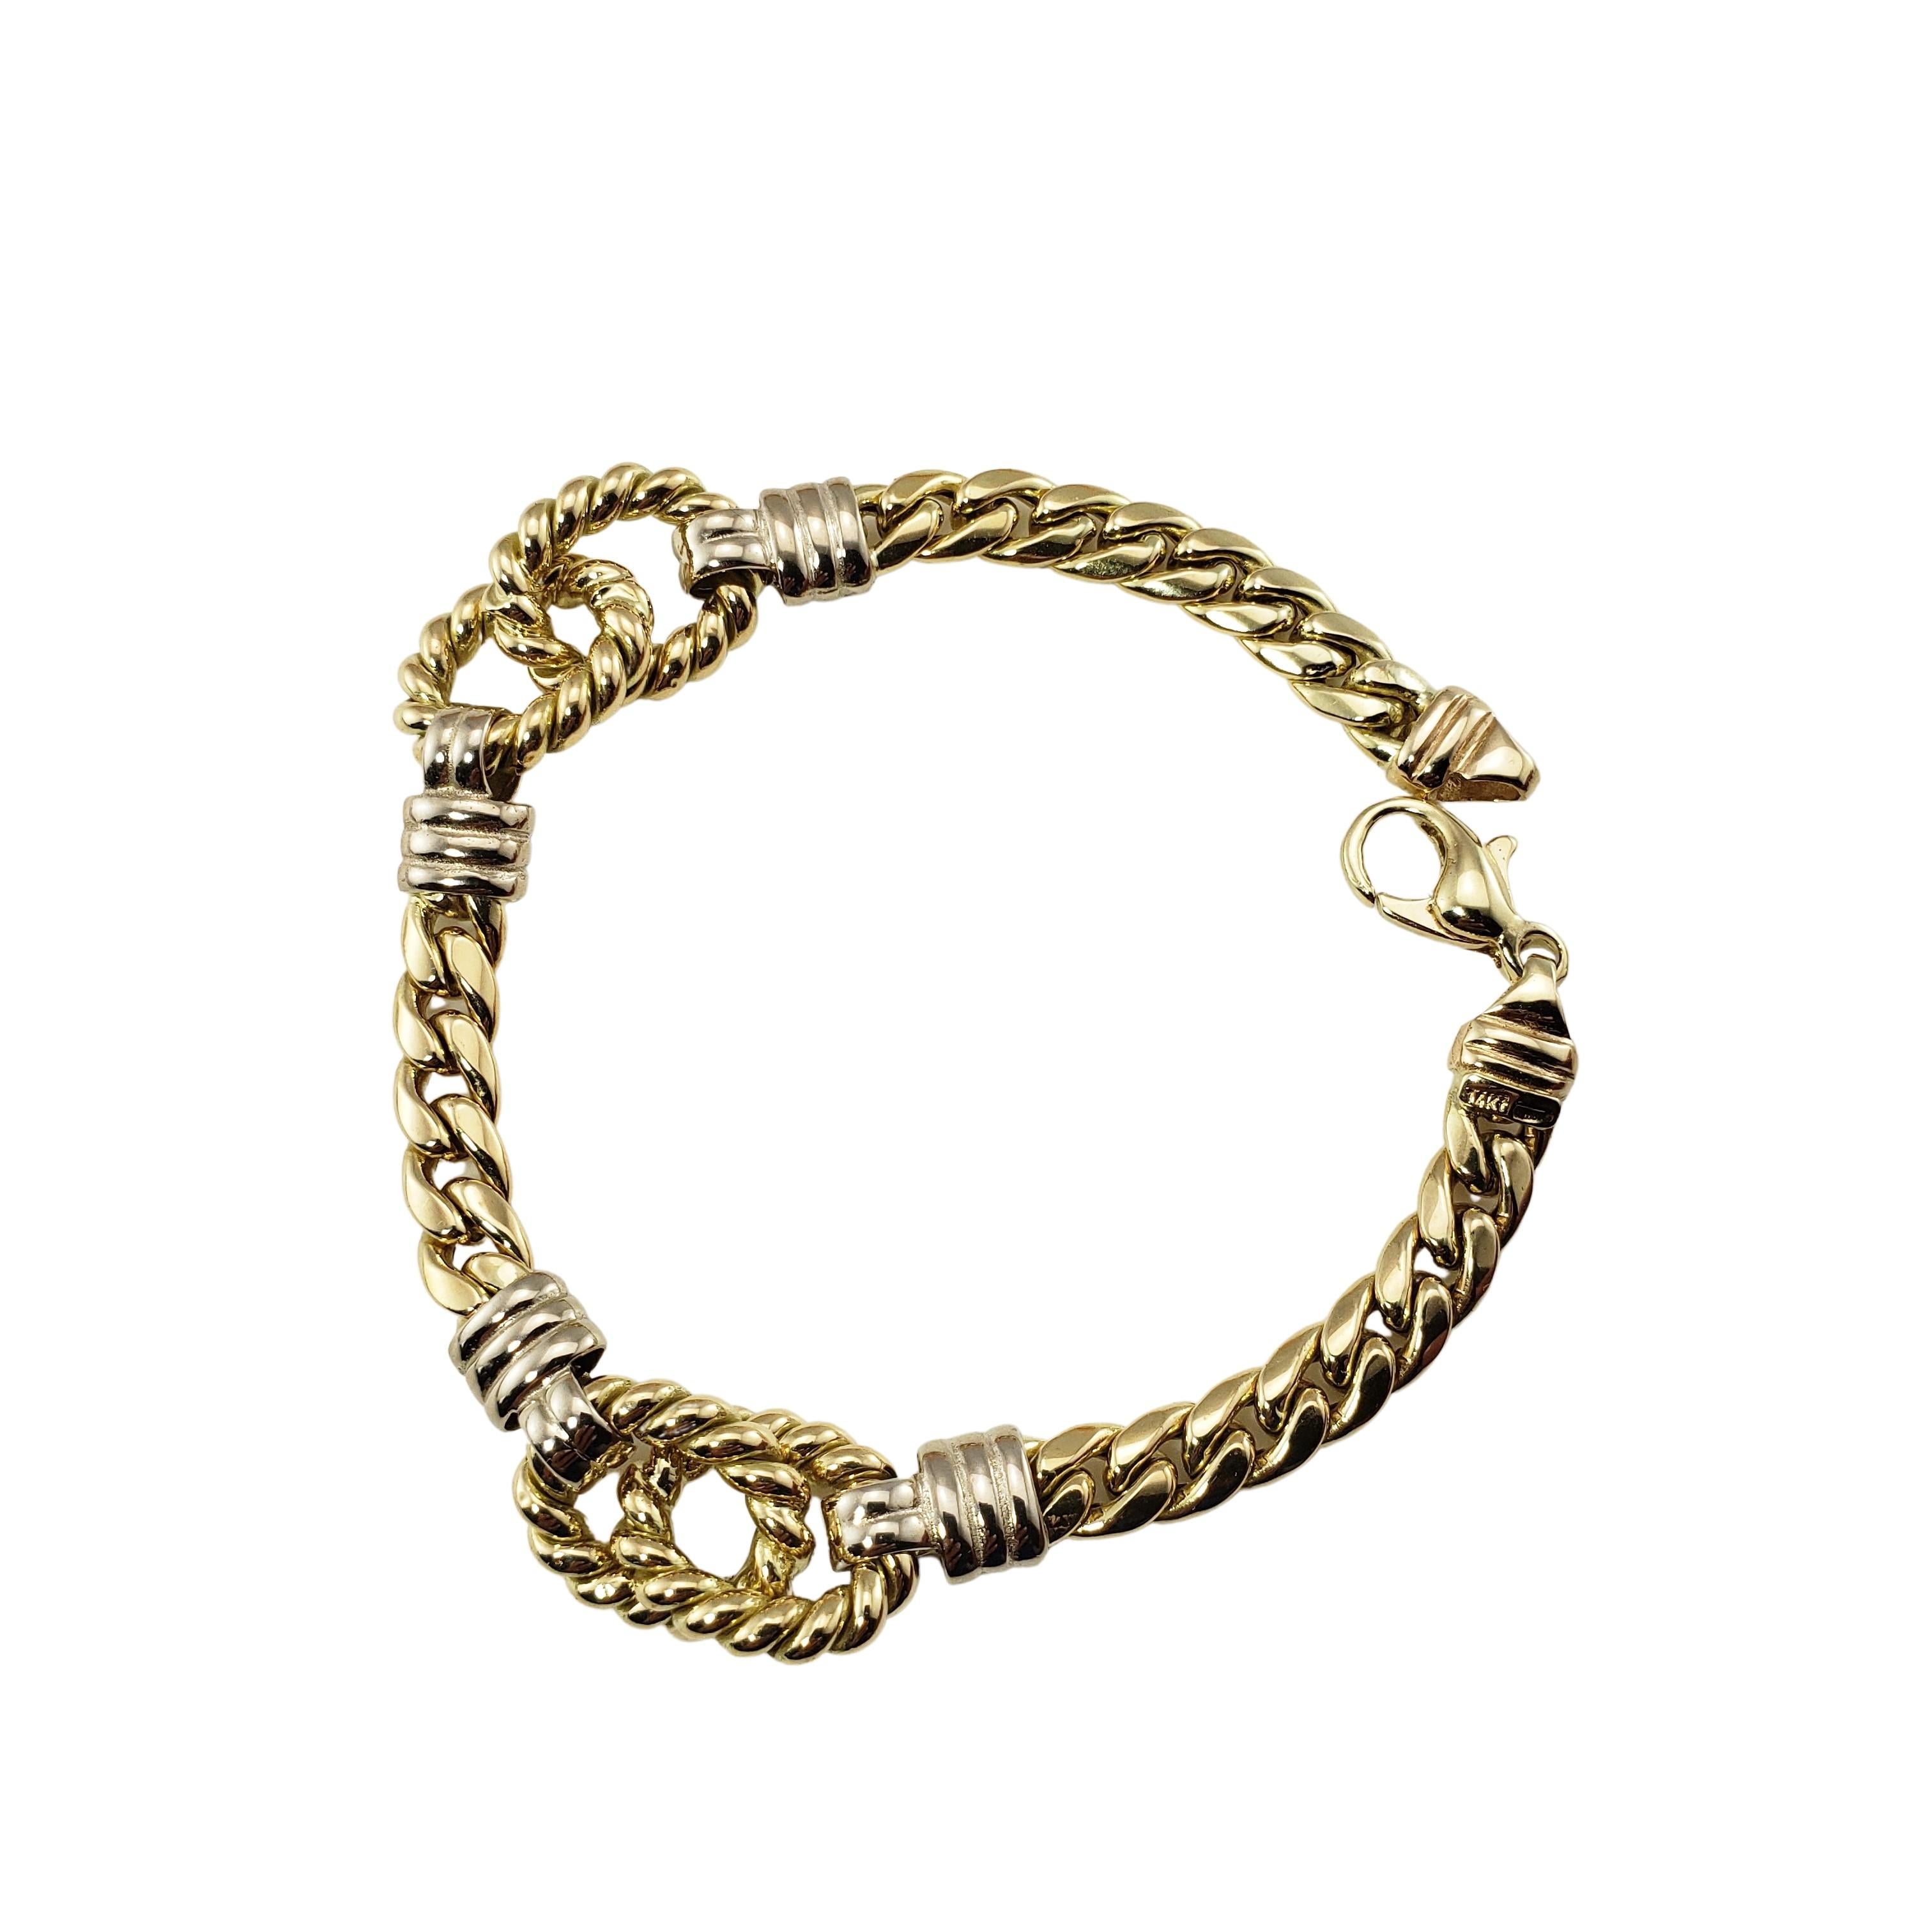 14 Karat Yellow and White Gold Bracelet-

This lovely bracelet is crafted in beautifully detailed 14K yellow and white gold.  Width:  5 mm.

Size: 6.25 inches

Weight:  7.5 dwt. /  11.7 gr.

Stamped:   Italy  14K 

Very good condition,